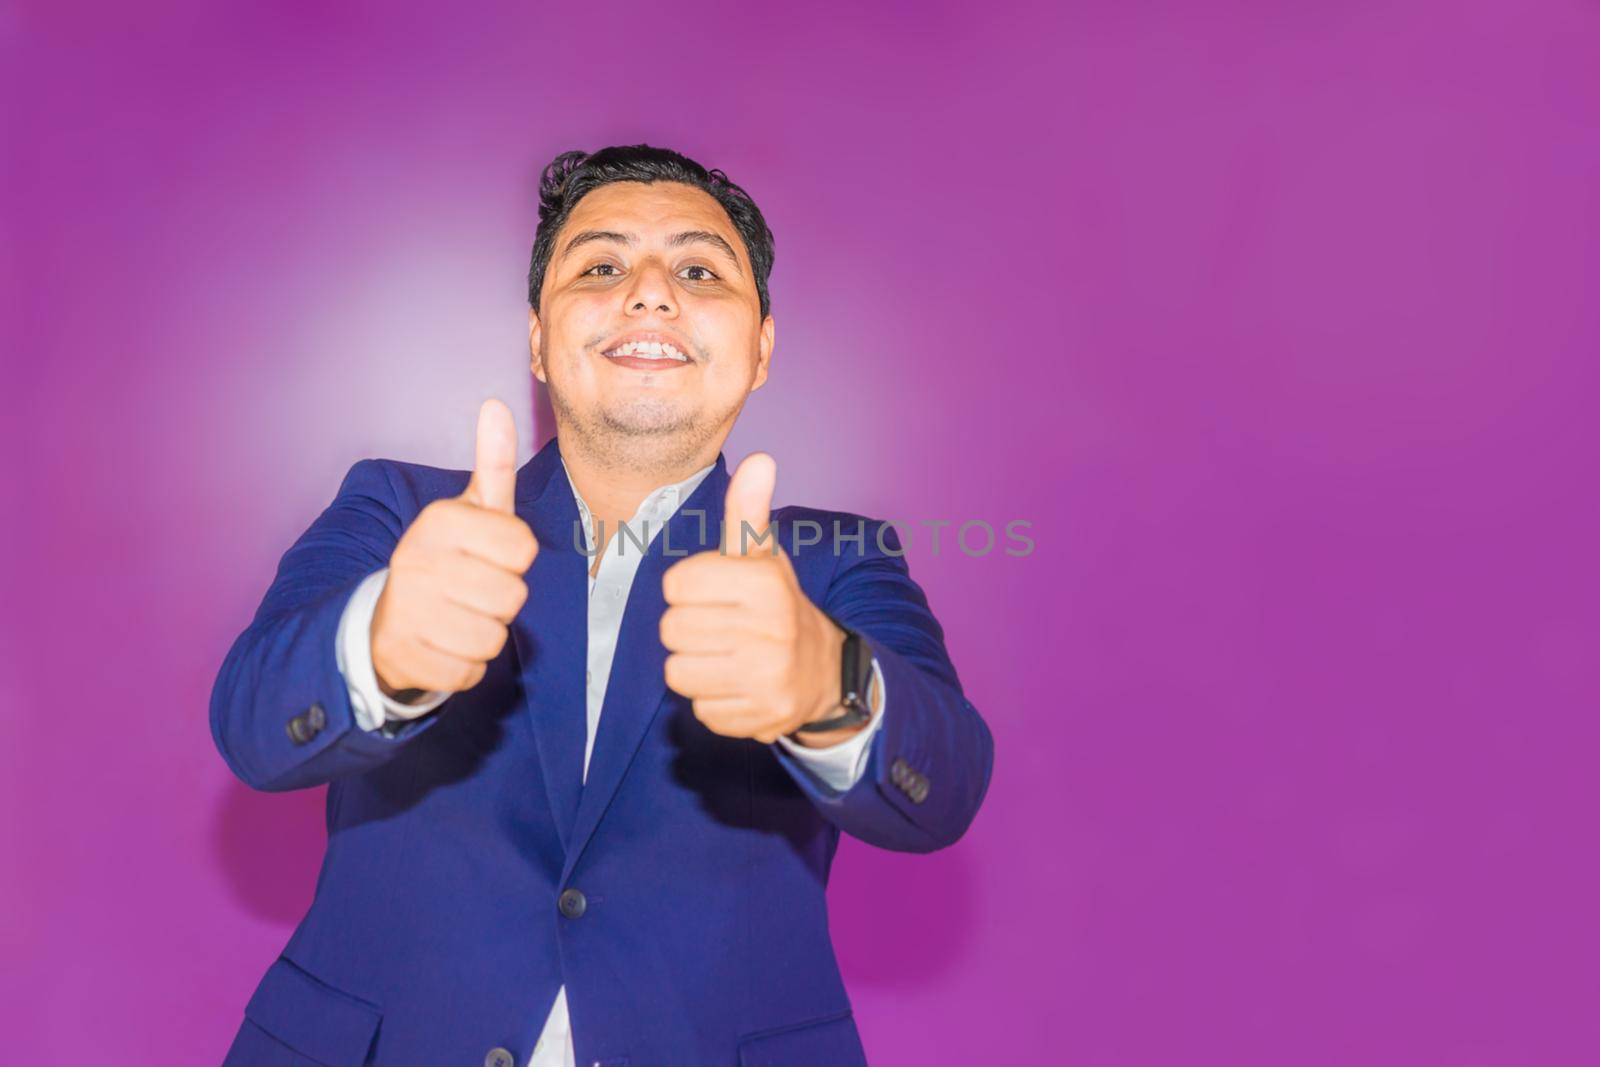 Latin man in a blue suit raising the thumbs of both hands on a plain purple background by cfalvarez